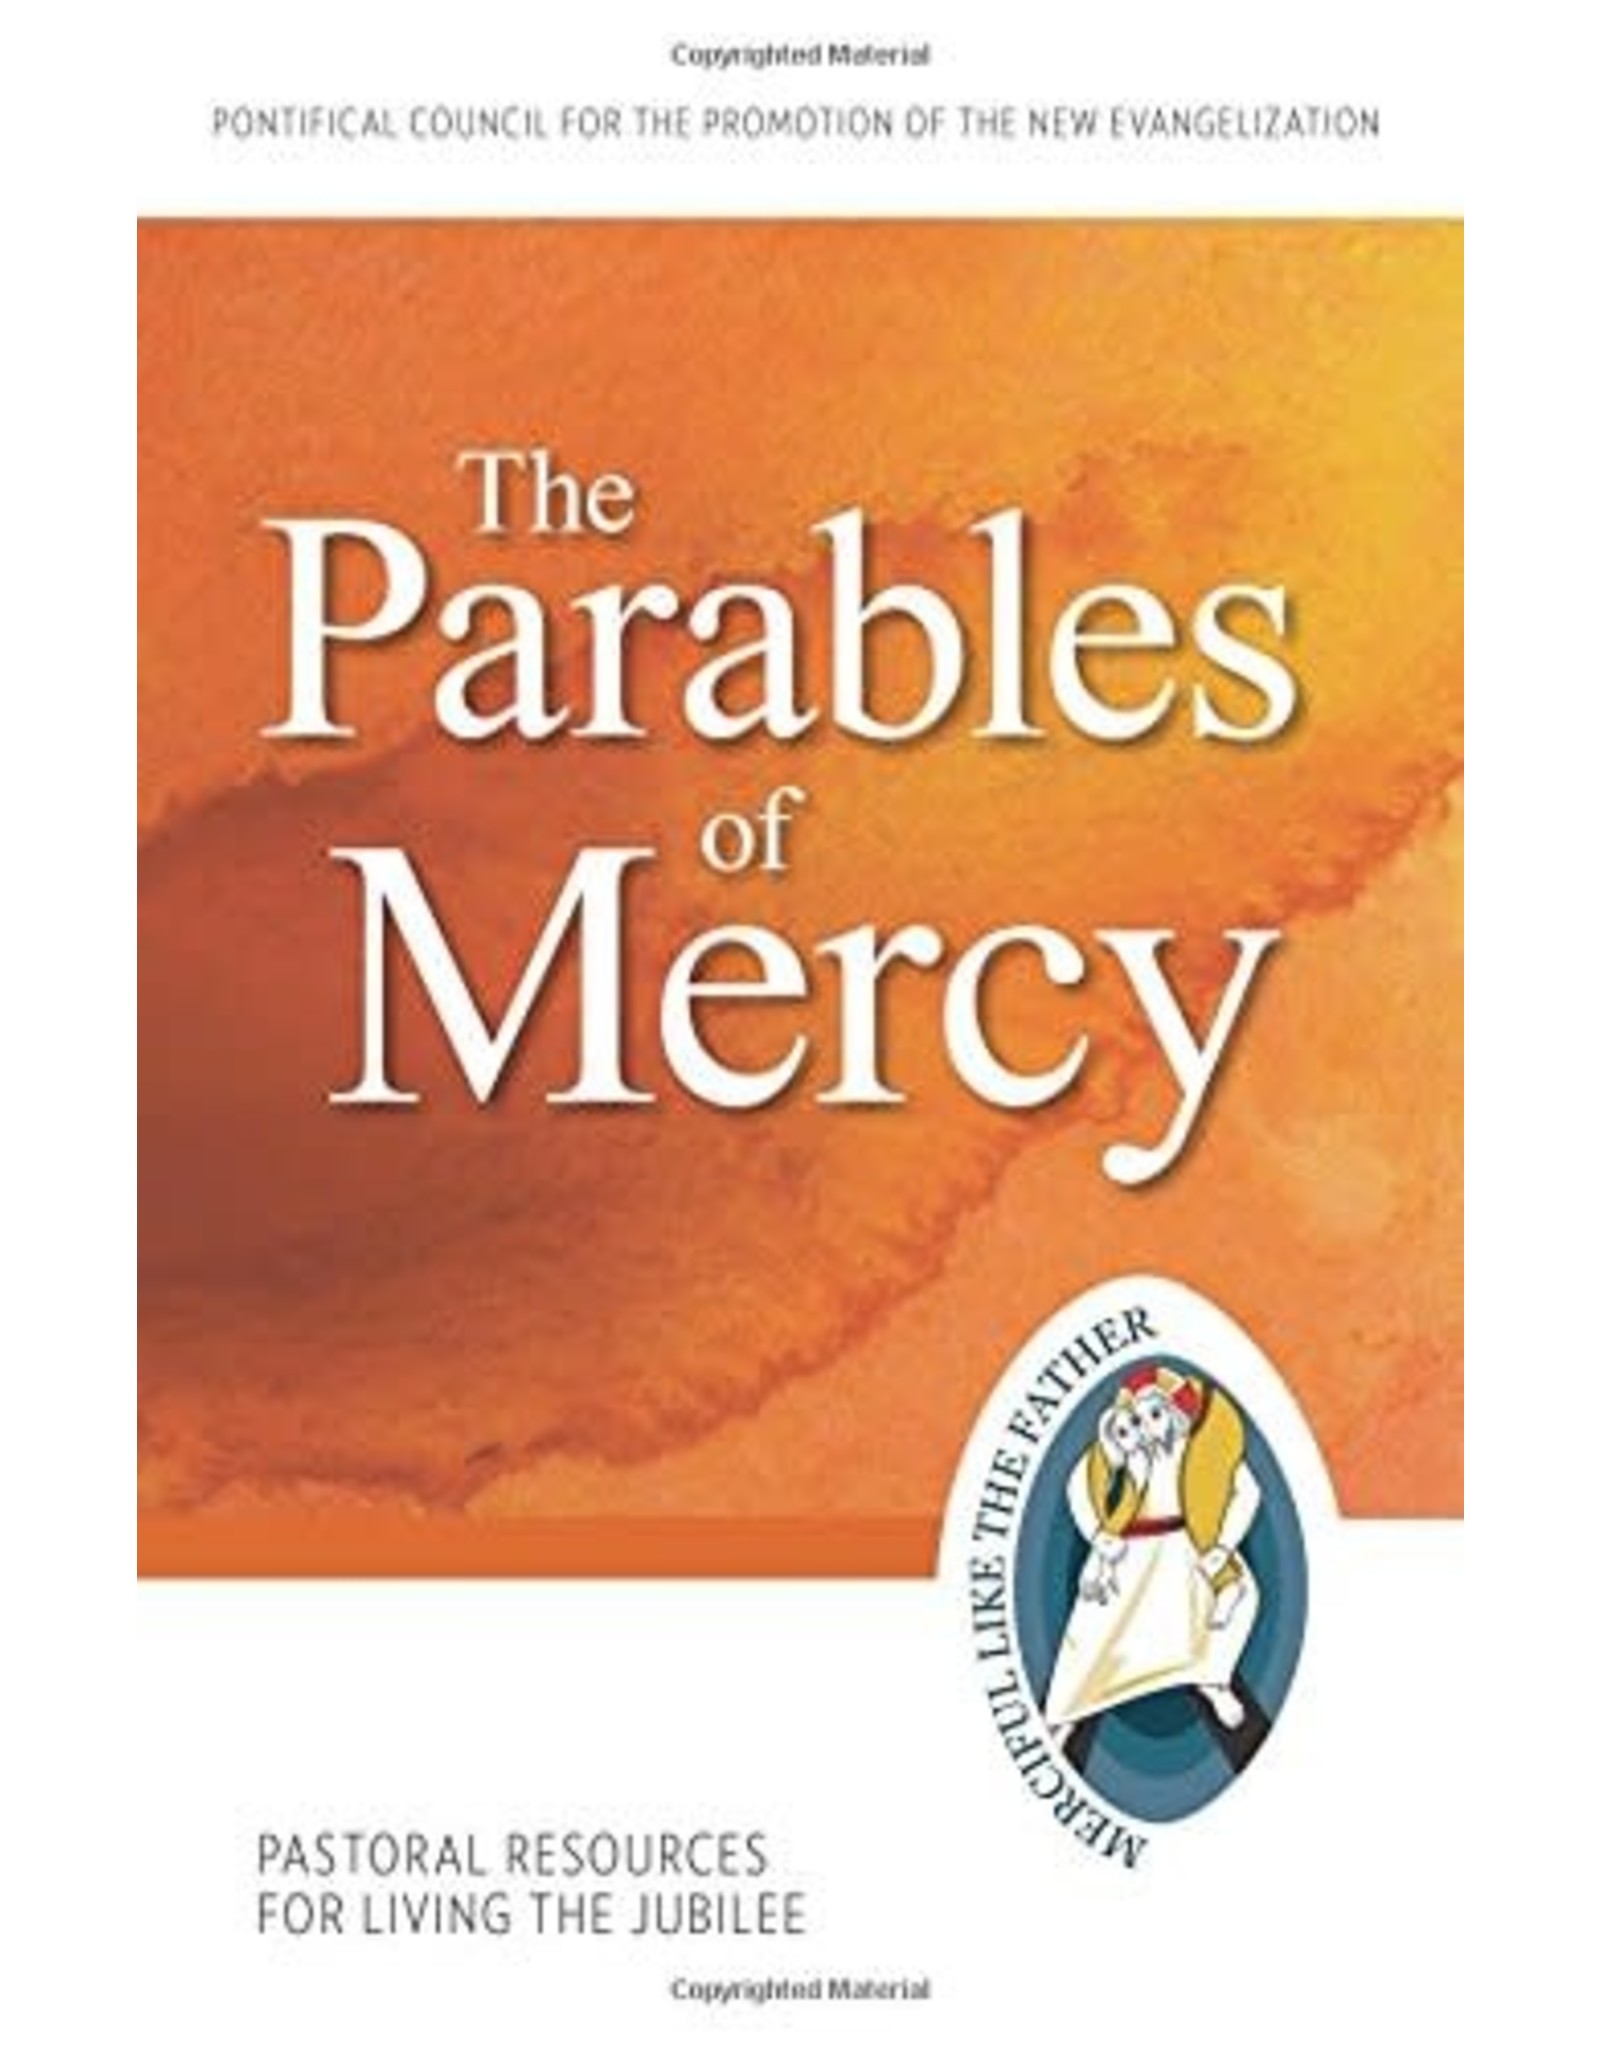 Parables of Mercy (Pastoral Resources for Living the Jubilee)